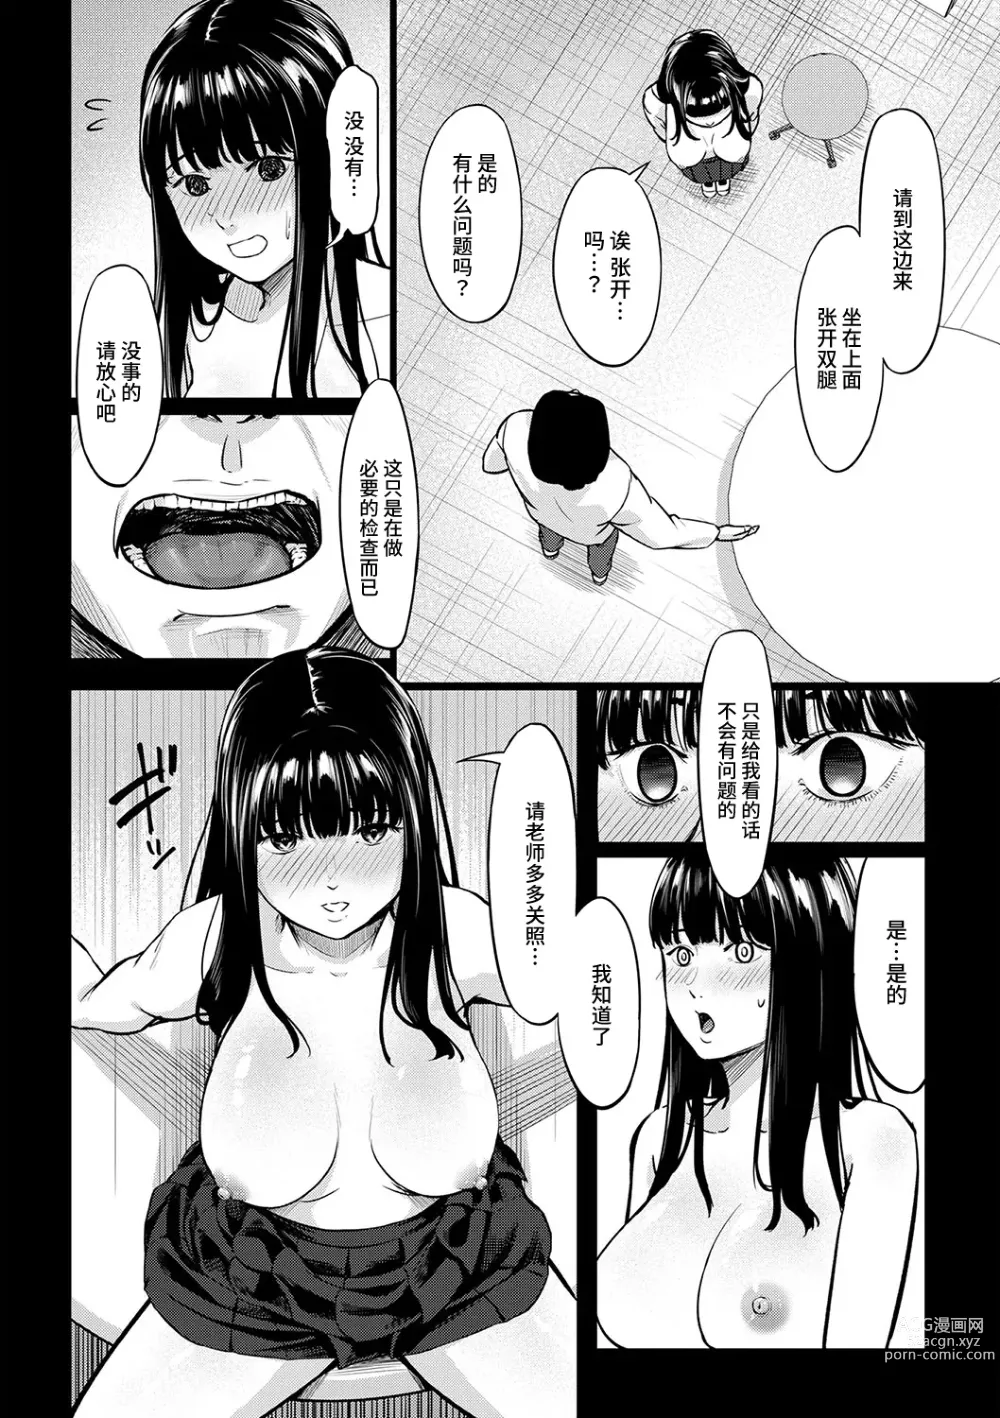 Page 20 of manga Obedience Girl Ch. 1